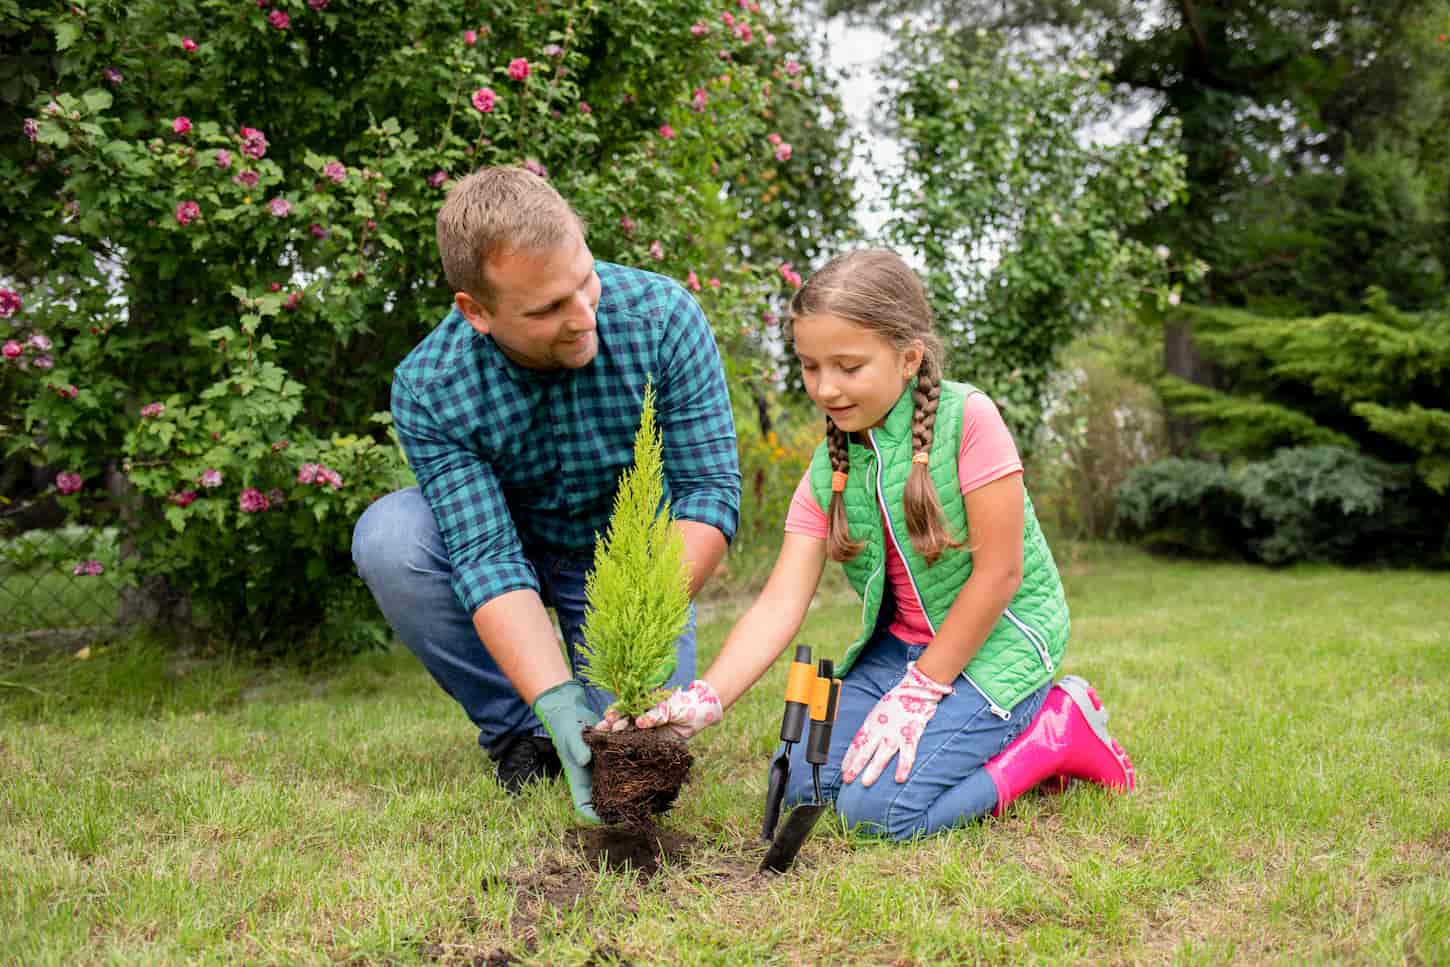 An image of Dad and daughter planting trees together in the backyard garden.